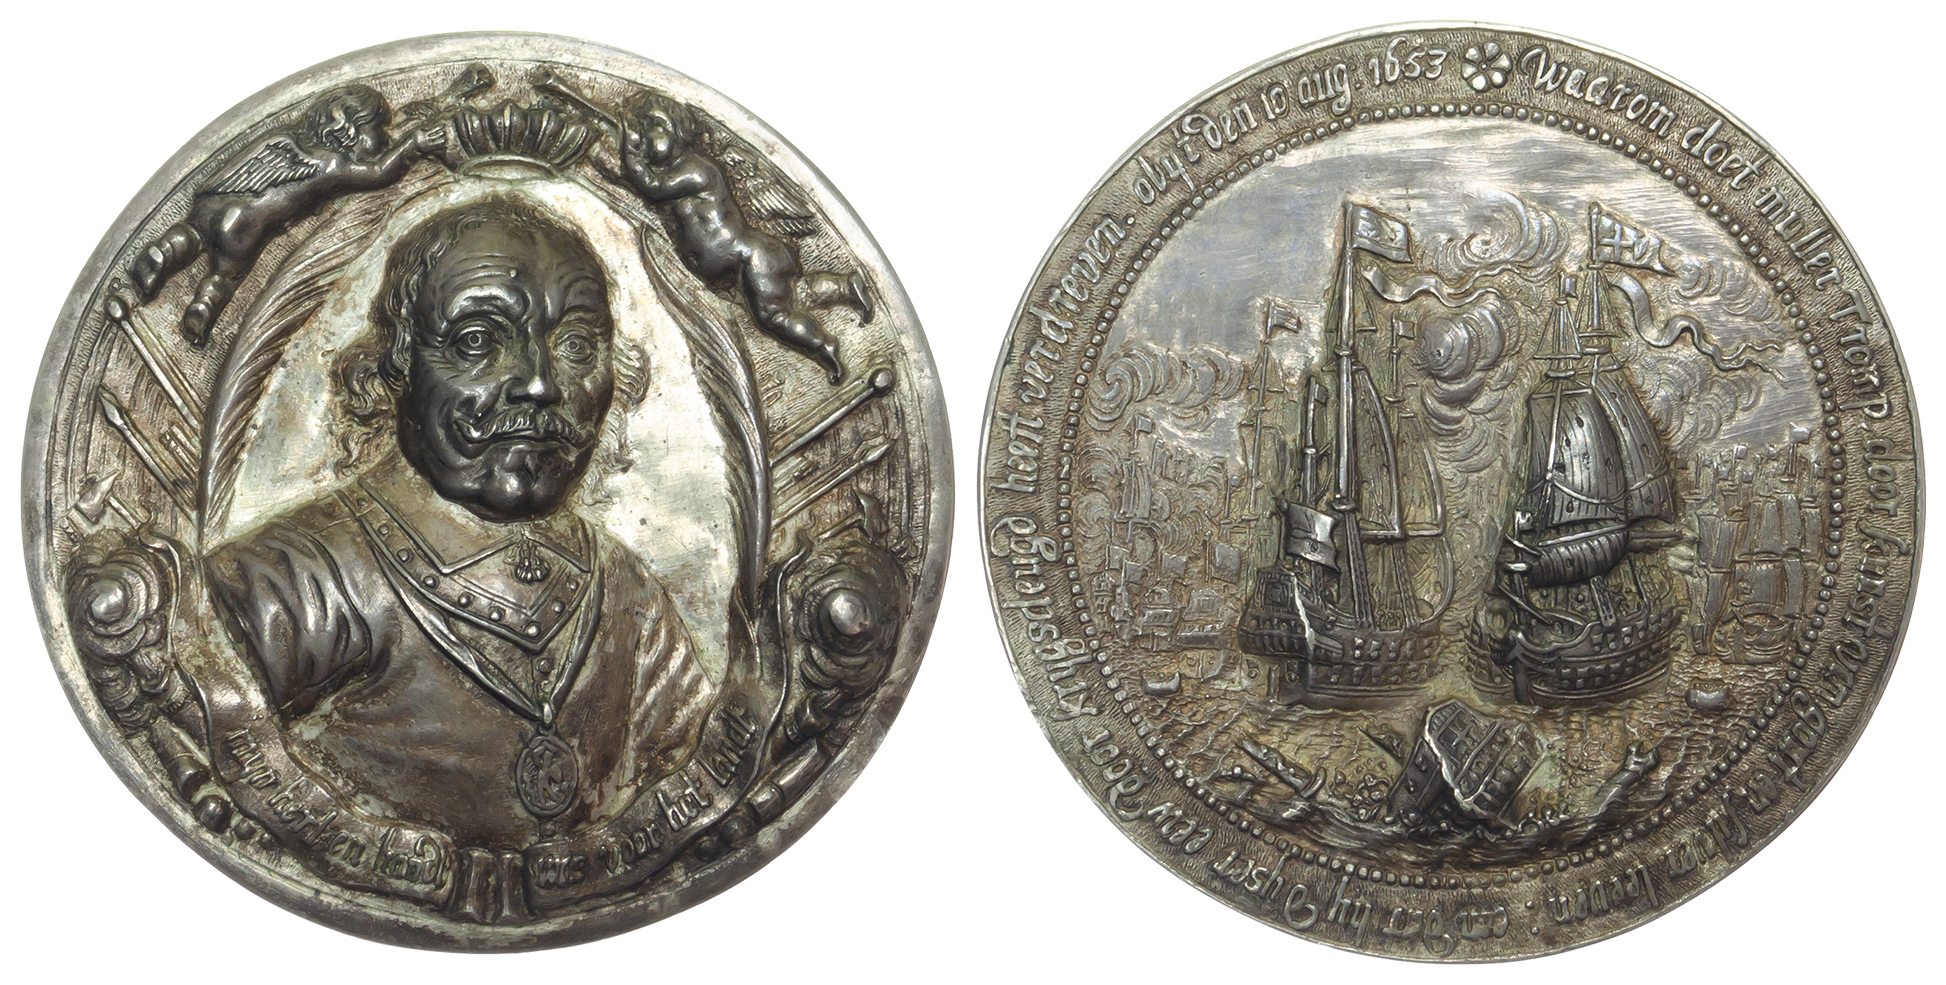 Commonwealth, Death of Admiral Tromp, Silver Medal, 1653